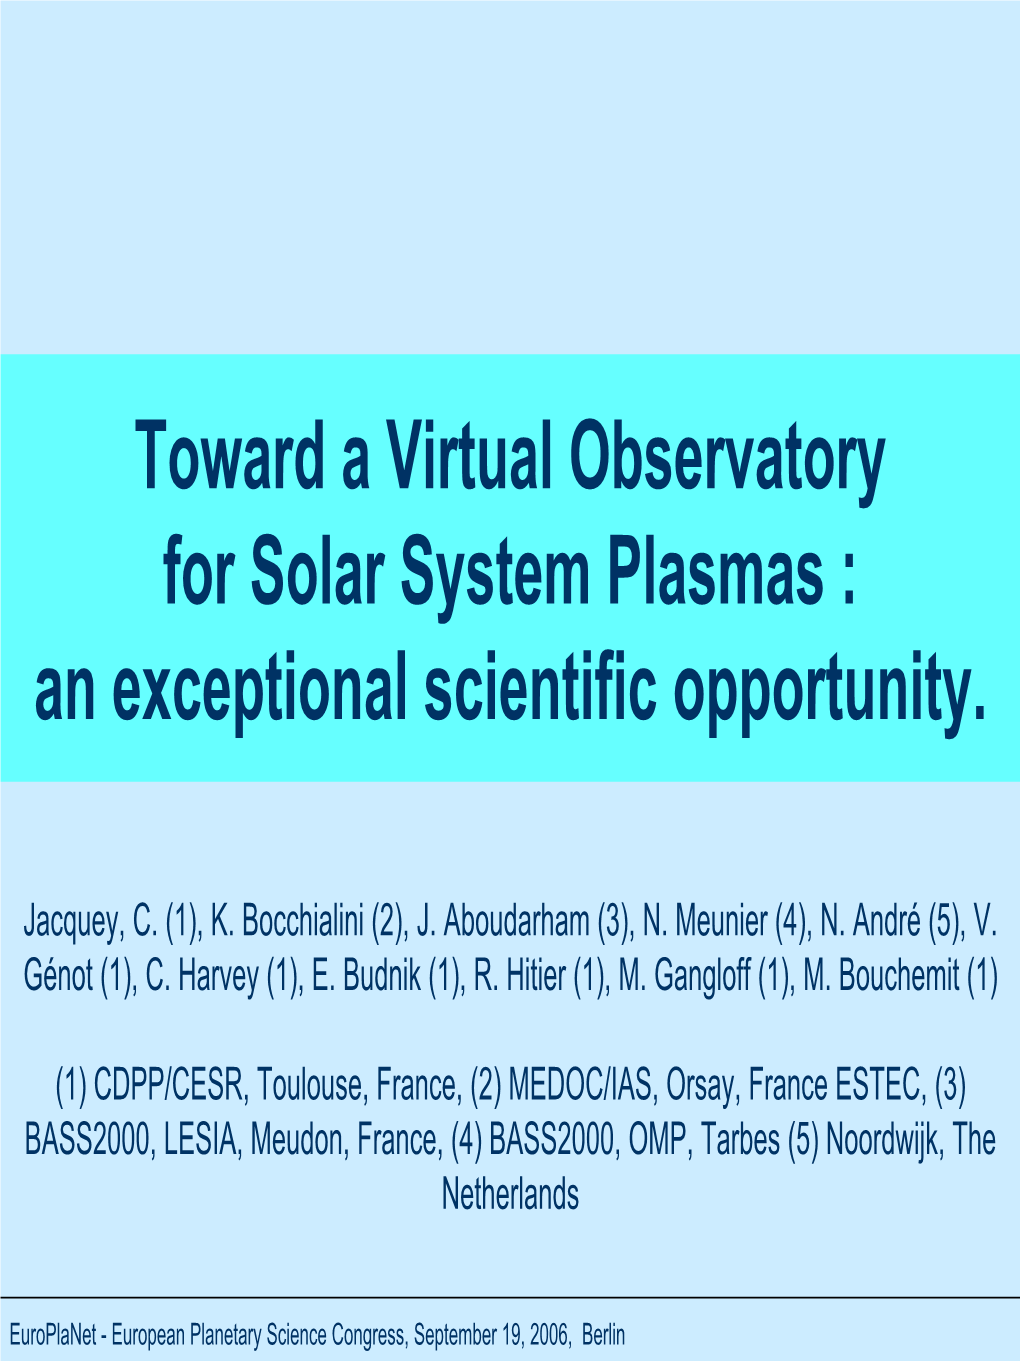 Toward a Virtual Observatory for Solar System Plasmas : an Exceptional Scientific Opportunity